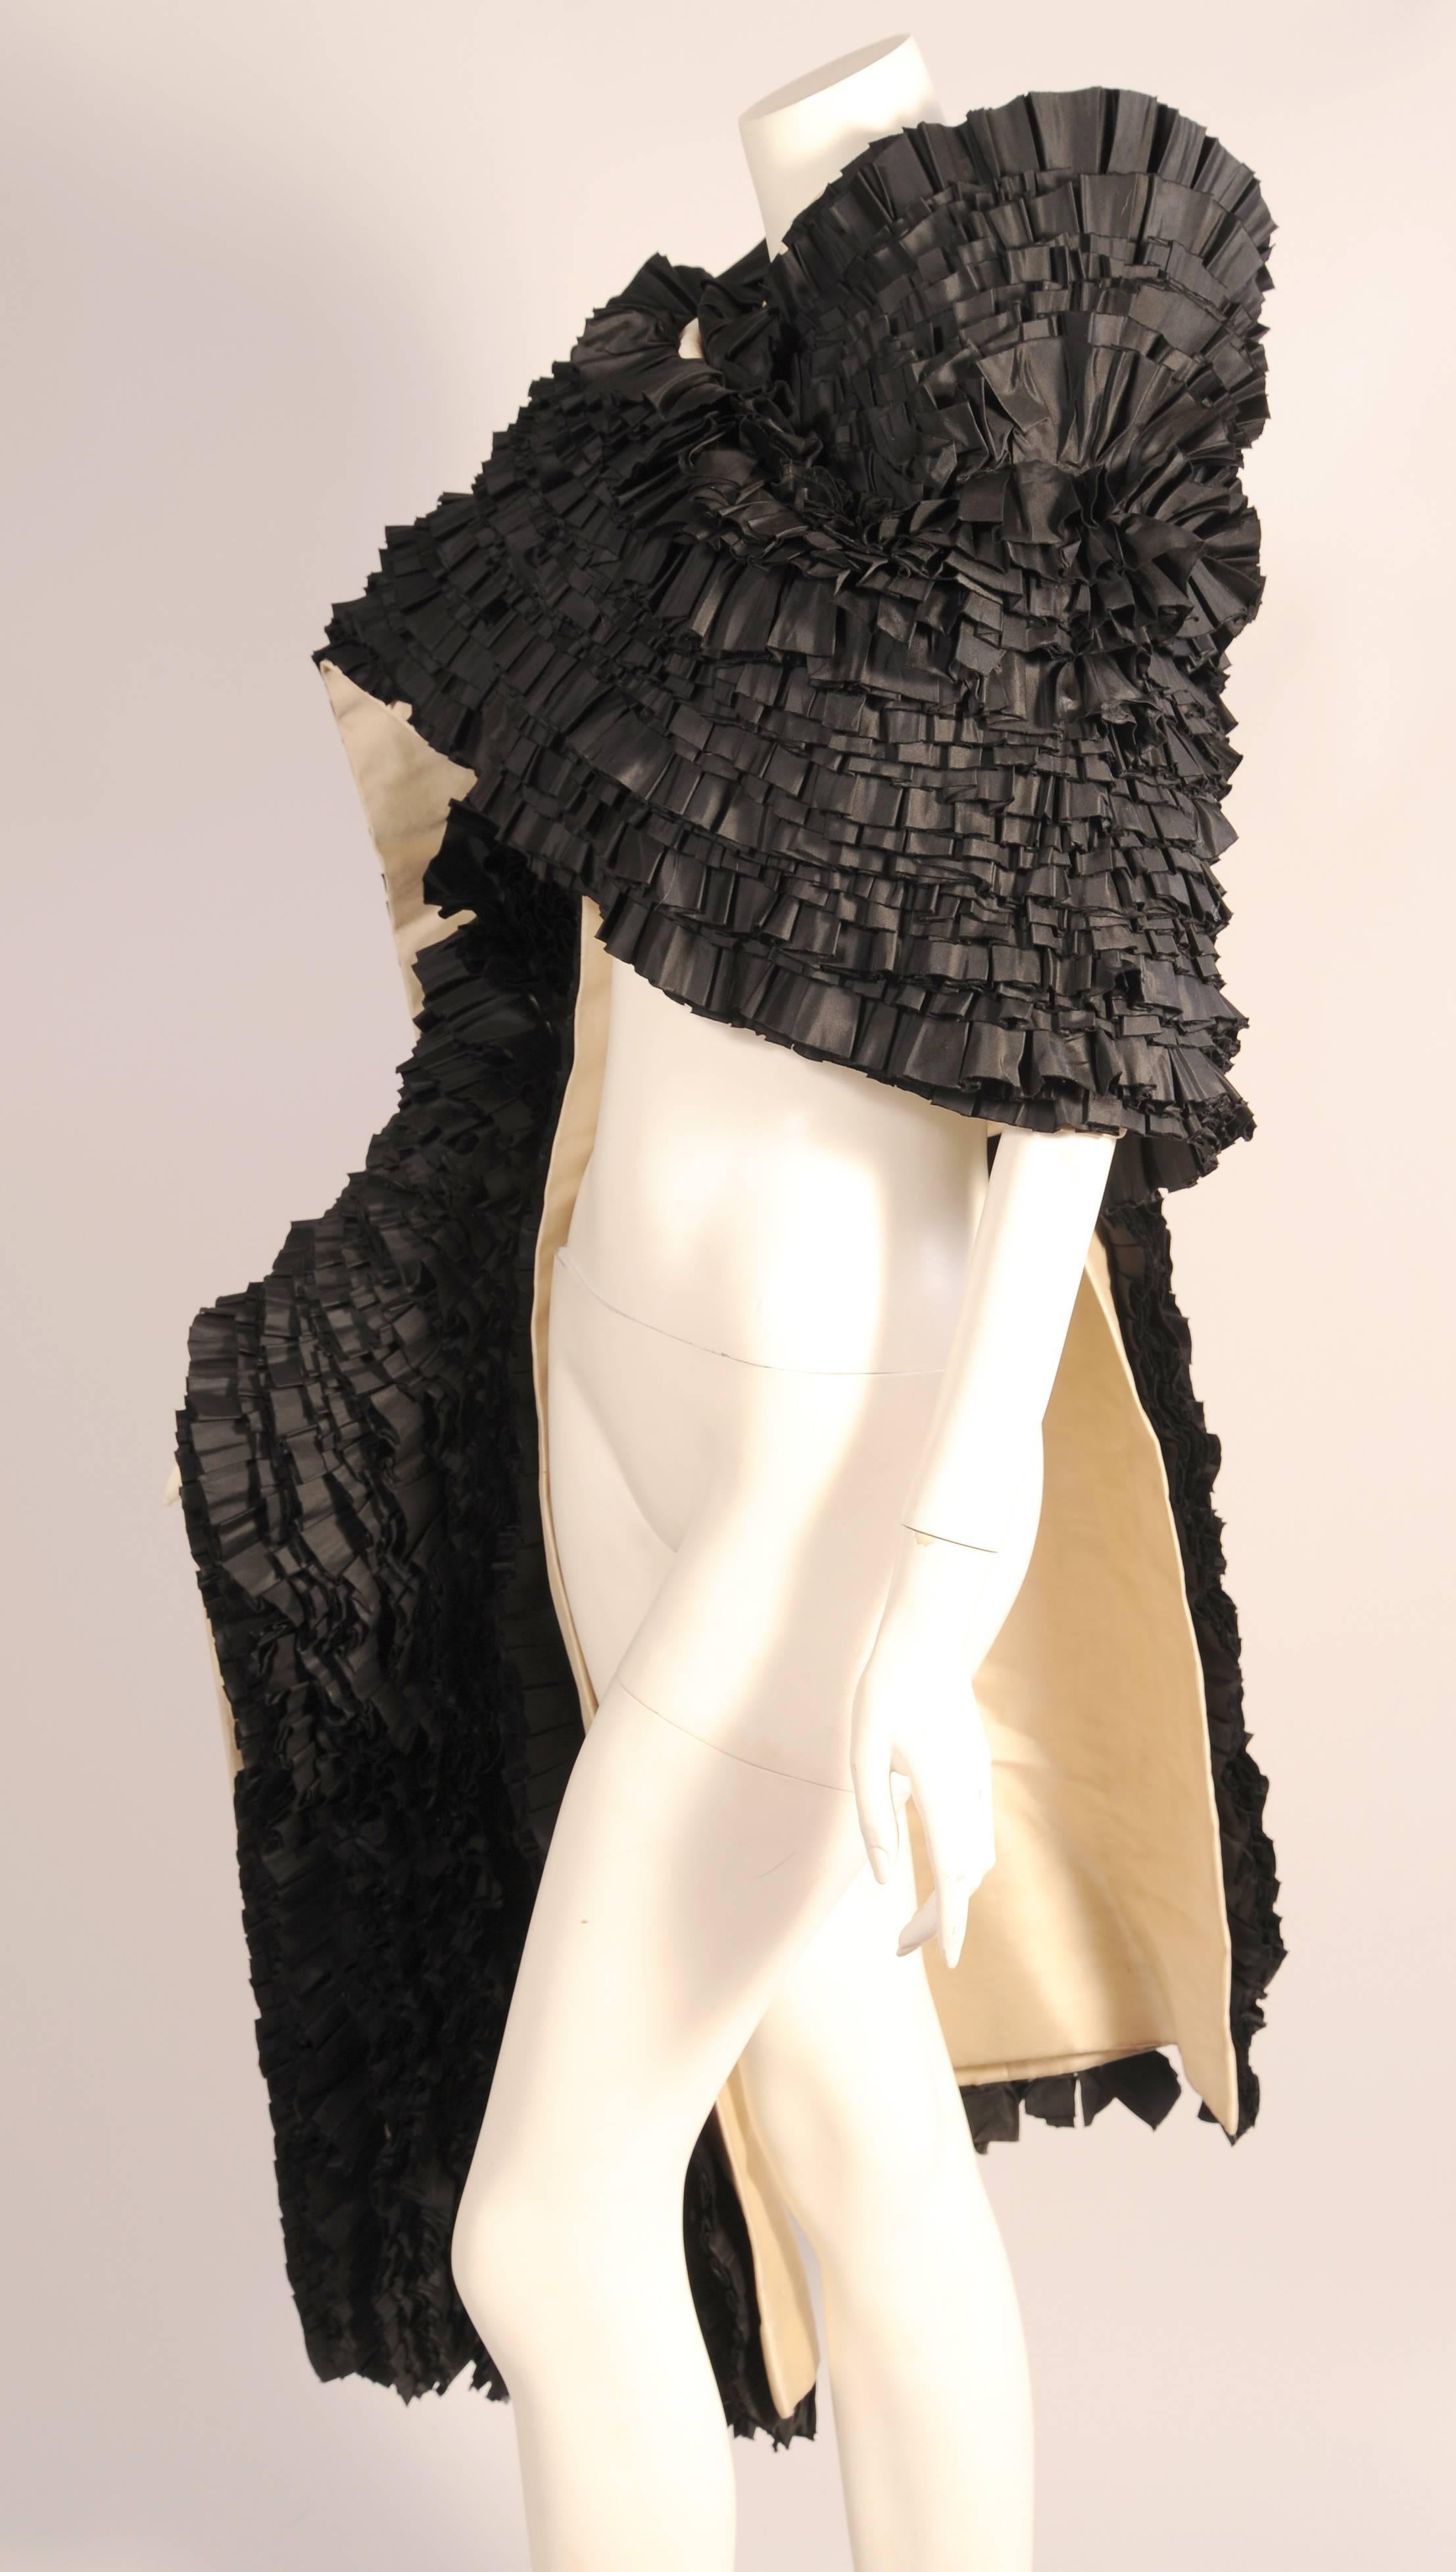 Forty rows of fine black silk ruffles add glamour and whimsy to this large stole or wrap made from ivory silk gazar. It is completely hand sewn and hand finished in the couture manner but there is no label. This piece would look equally fabulous